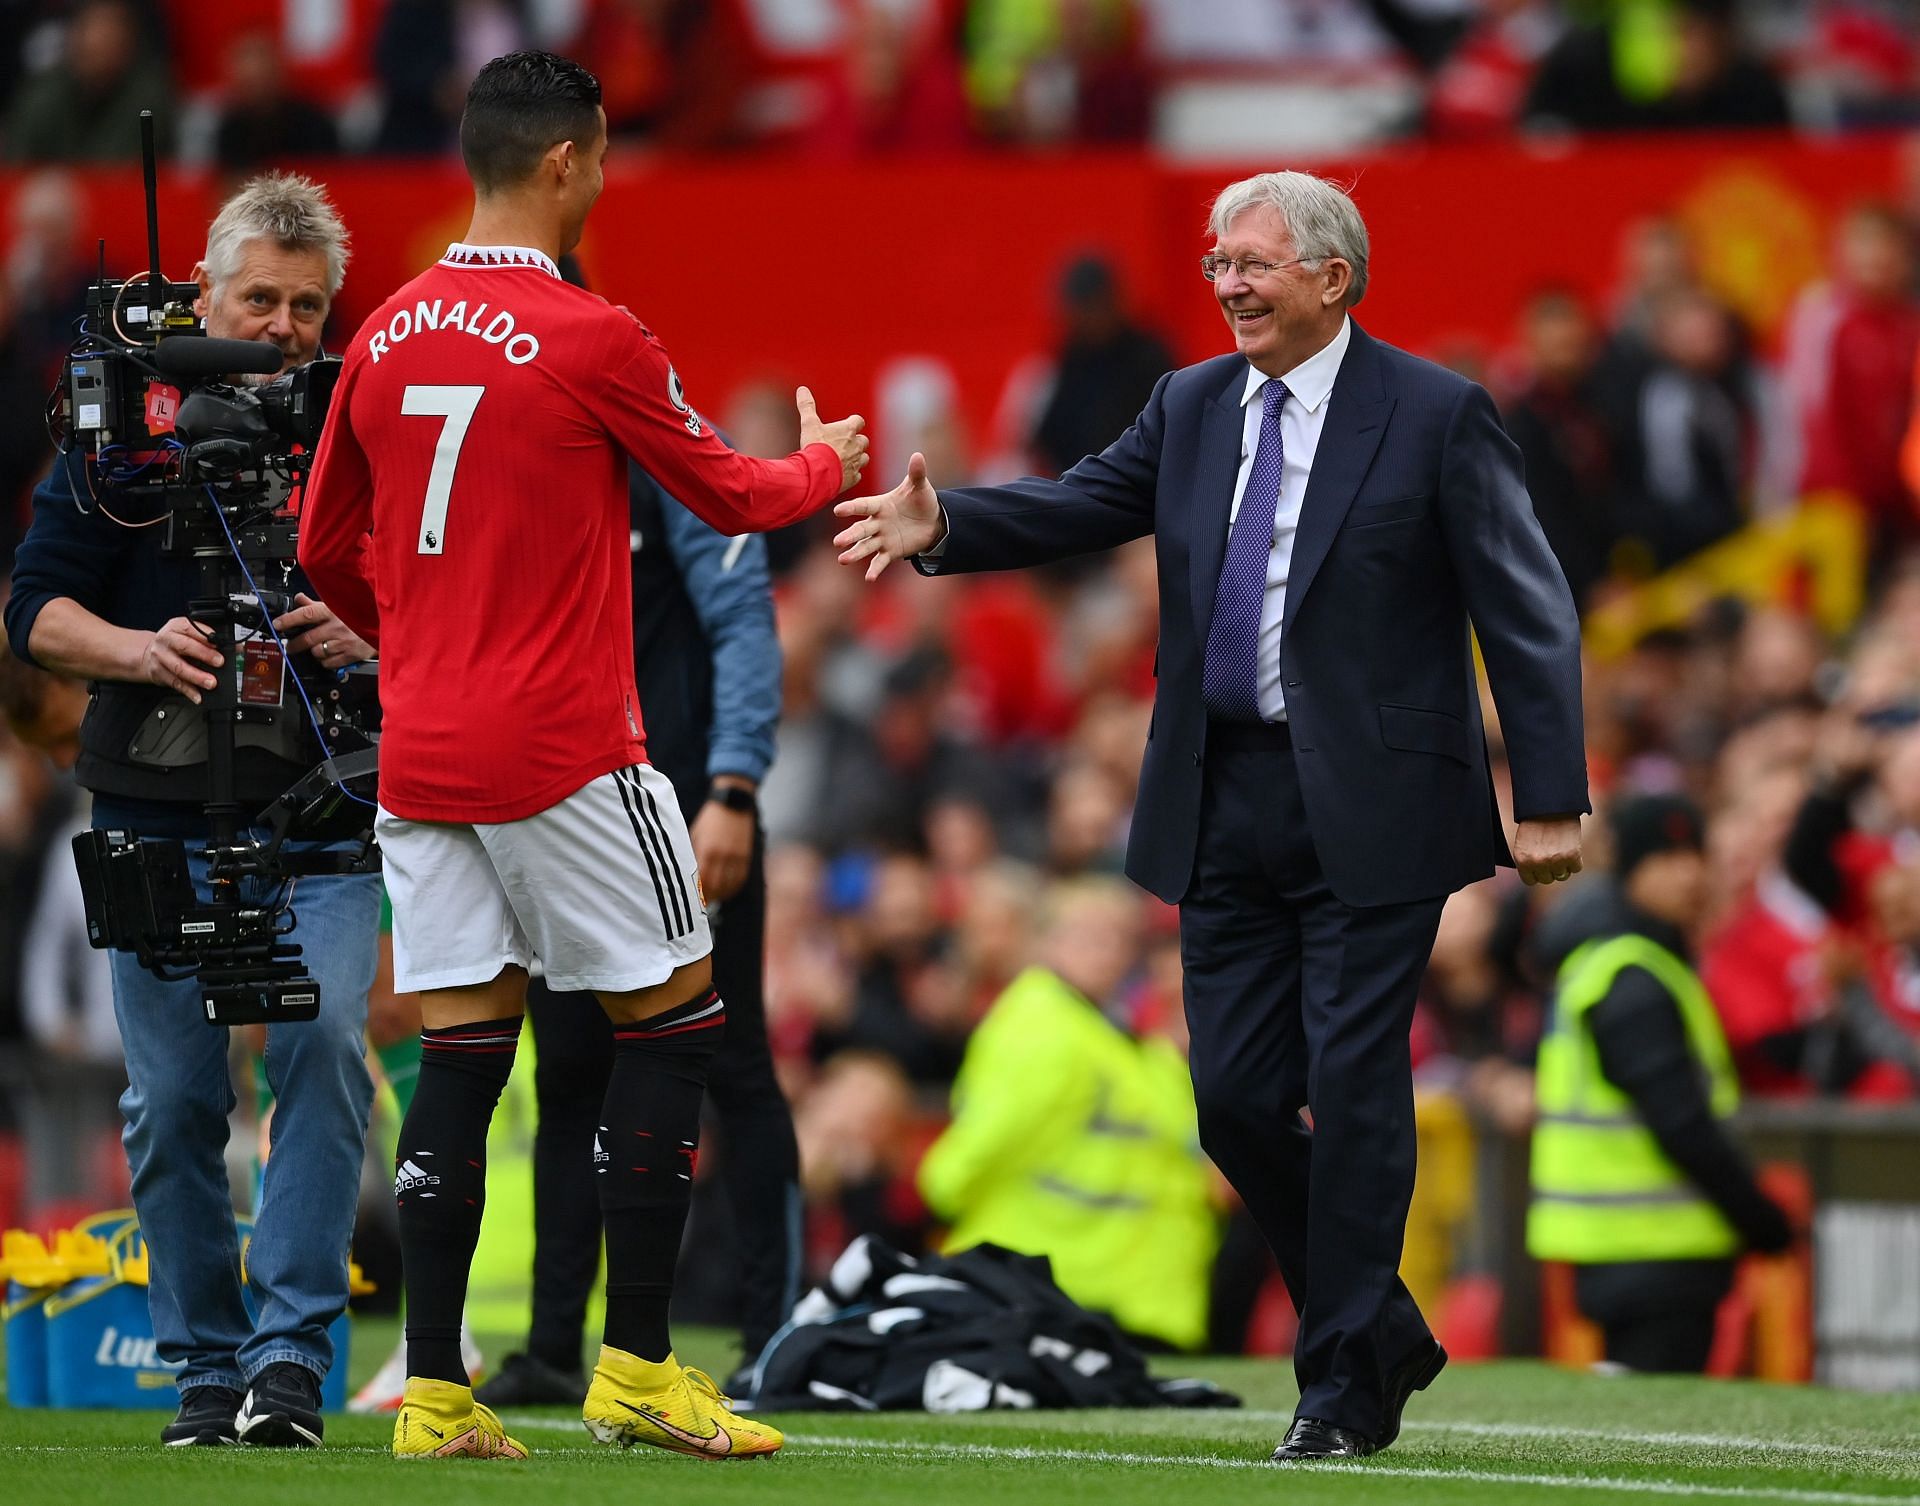 Ferguson helped develop Ronaldo into an all-time great at Manchester United.